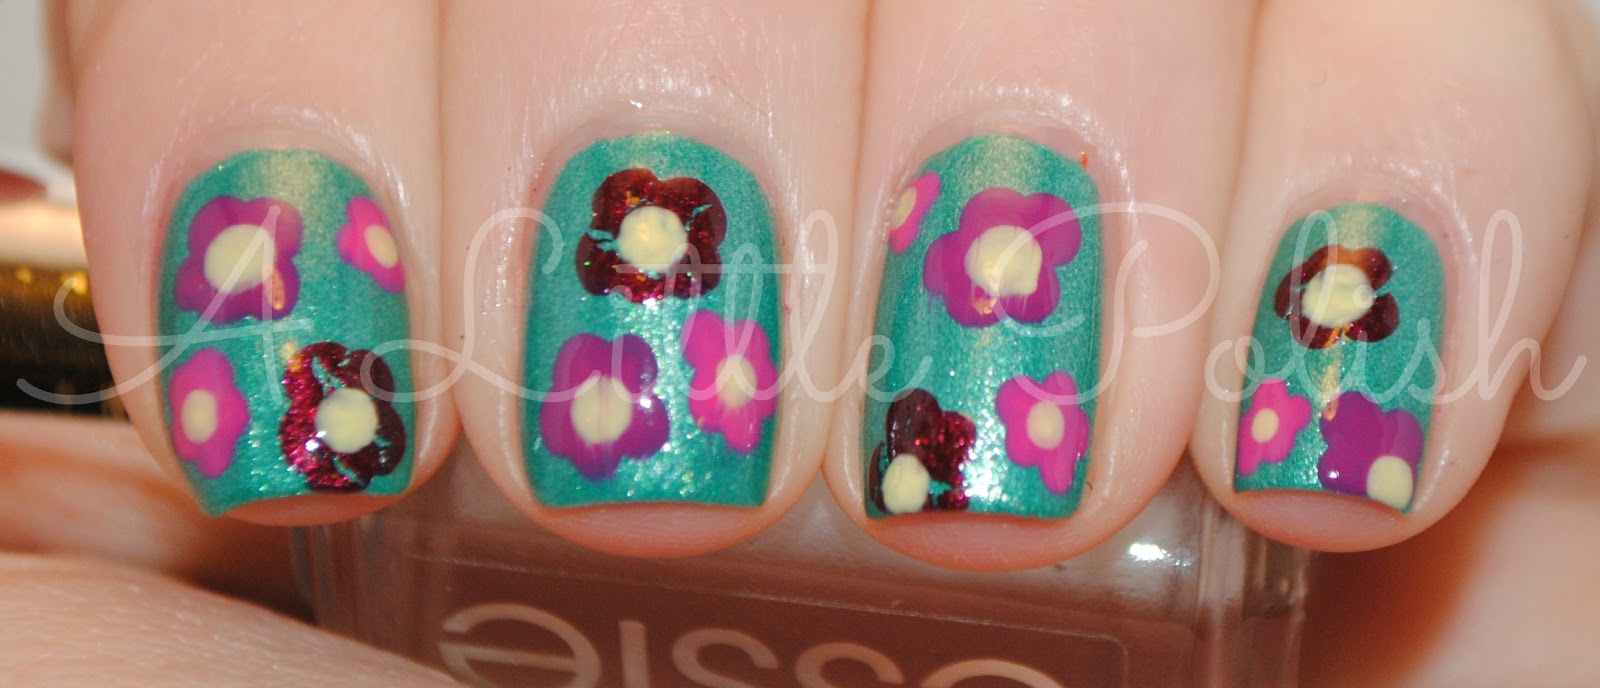 February Nail Art Designs with Flowers - wide 9